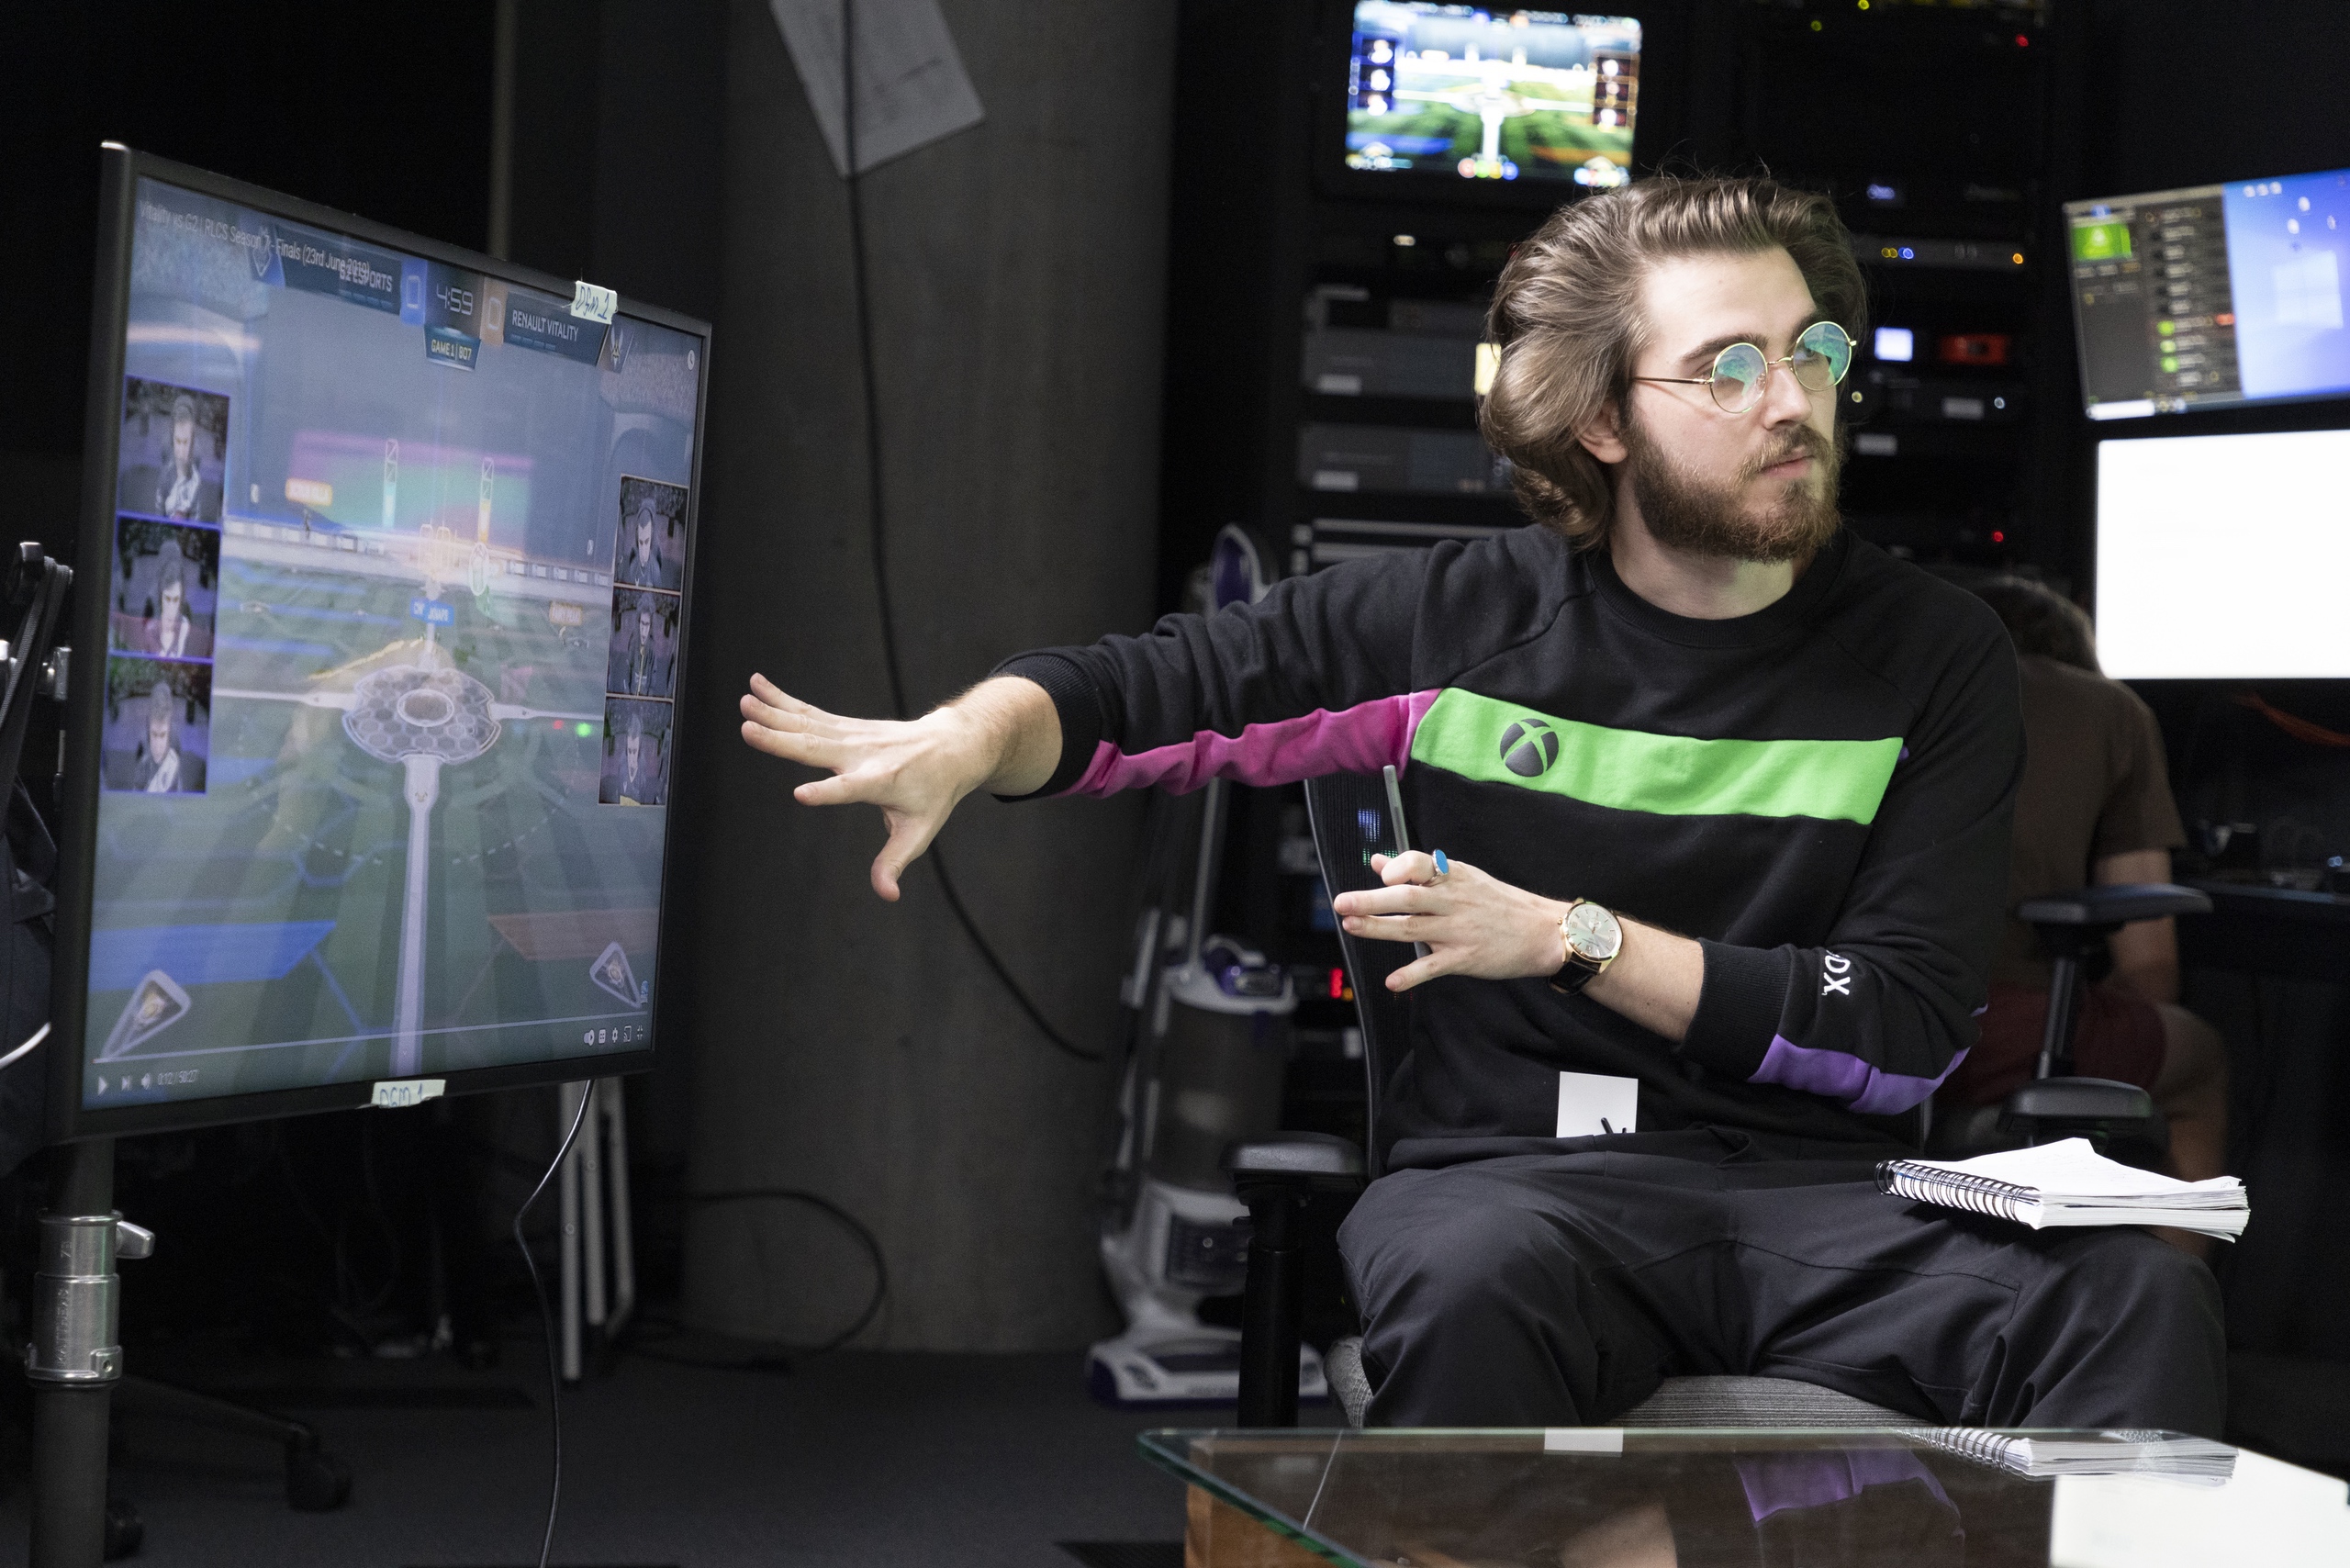 A person wearing glasses is sitting in front of a screen with his hands up and notepad on his lap. There are many screens behind him and to the side of him. His shirt is black and has an XBOX logo in green.